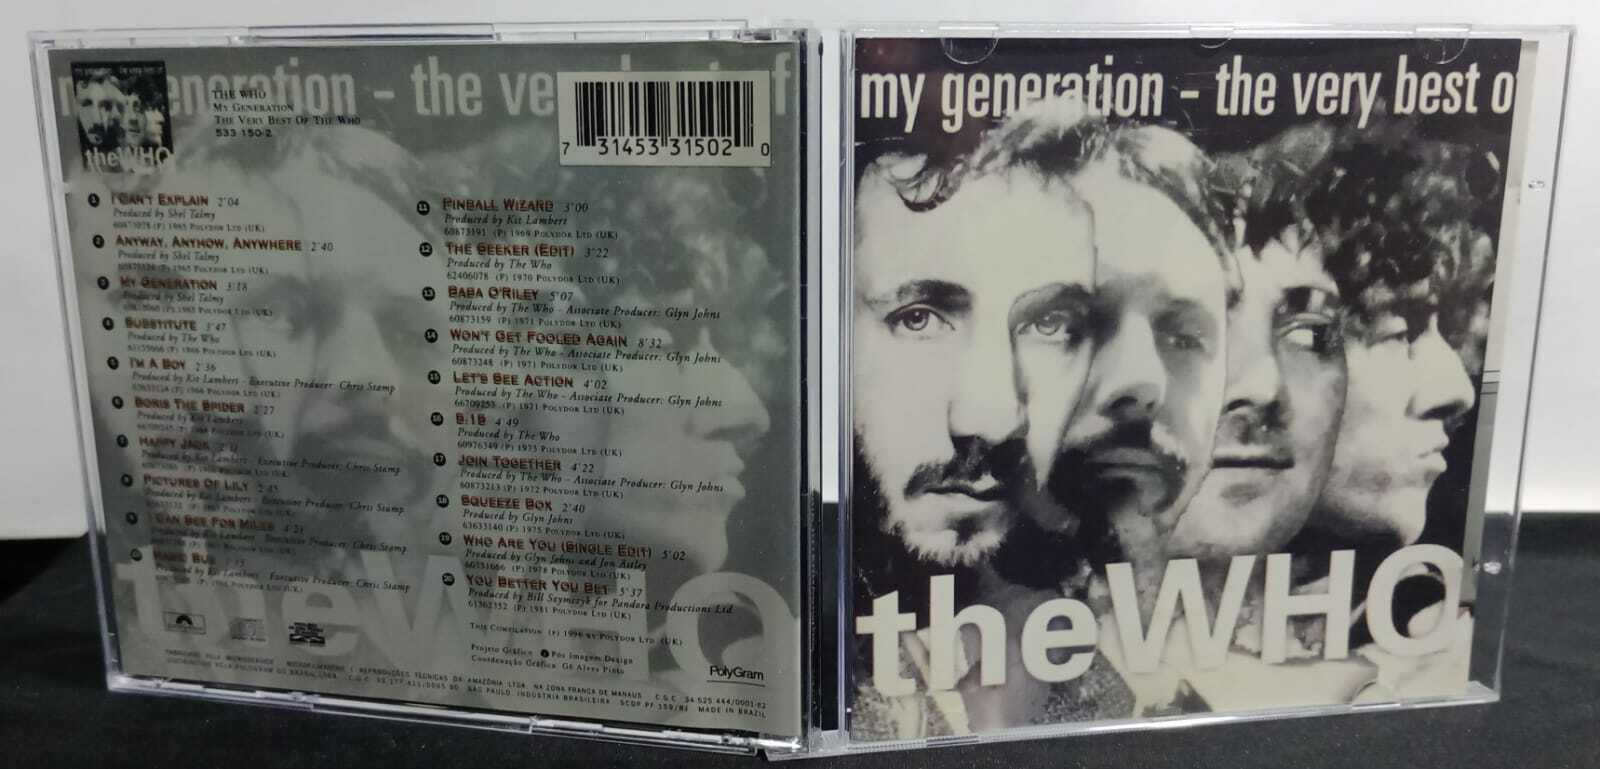 CD - Who the - My Generation The Best of